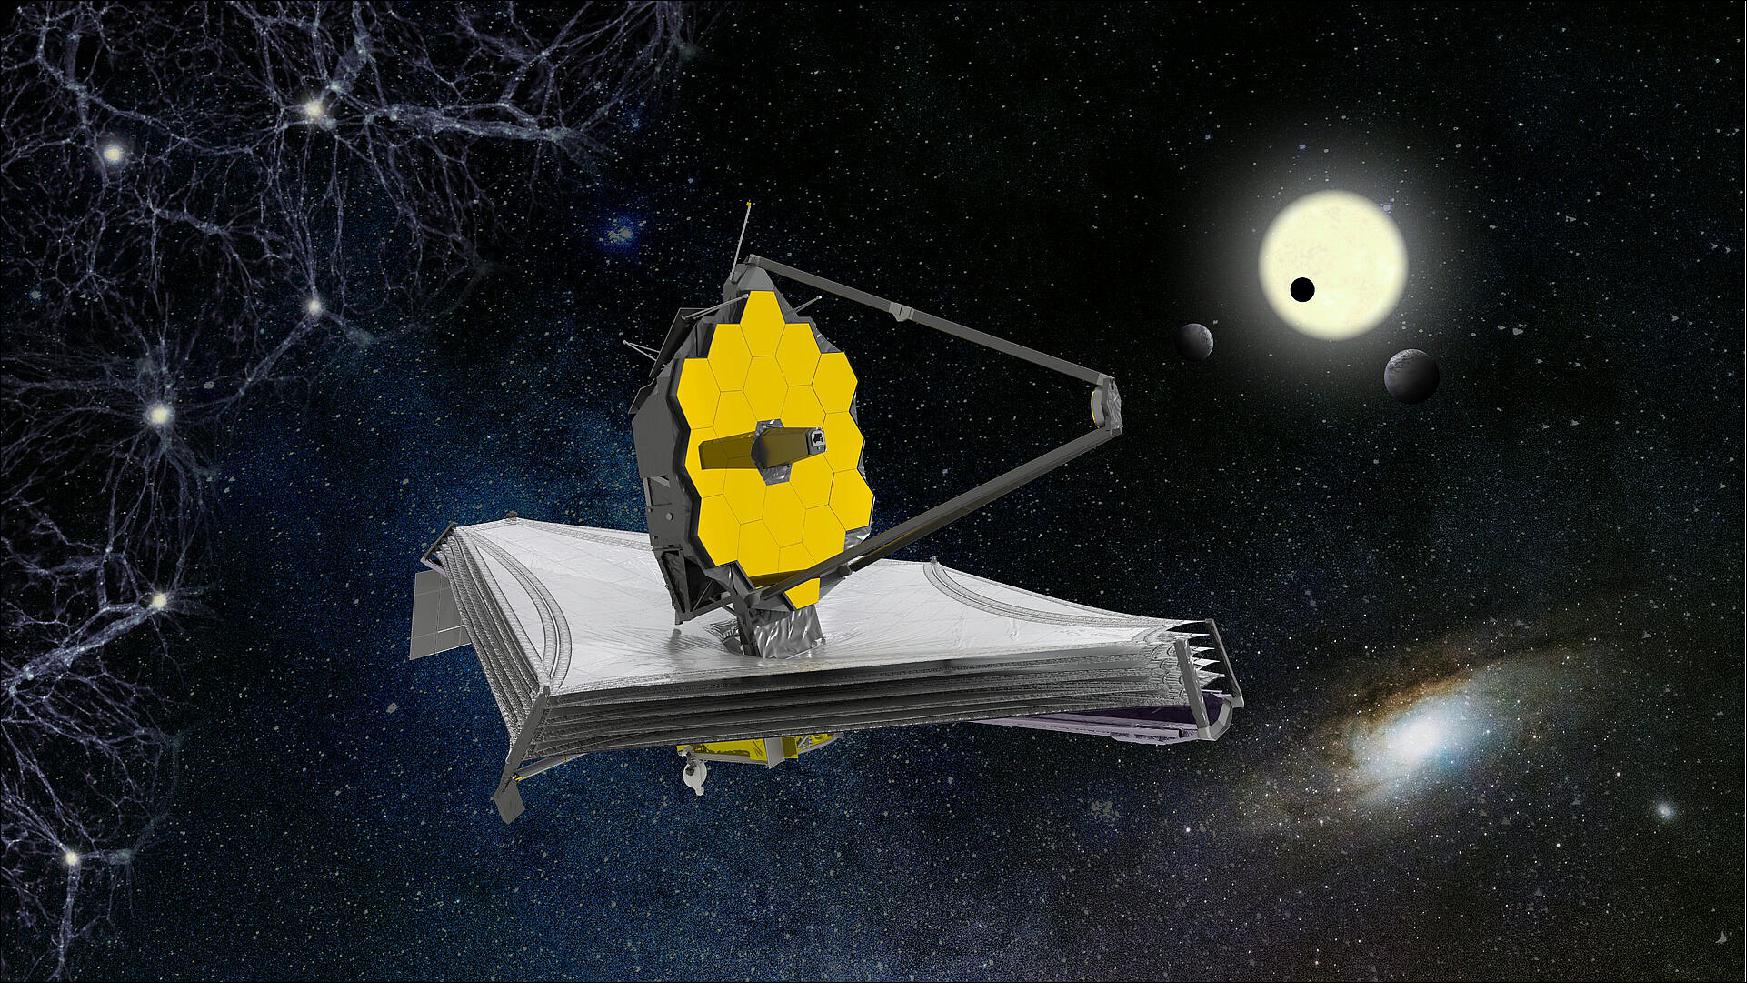 Figure 25: The James Webb Space Telescope (Webb) will be the largest, most powerful telescope ever launched into space. It follows in the footsteps of the Hubble Space Telescope as the next great space science observatory, designed to answer outstanding questions about the Universe and to make breakthrough discoveries in all fields of astronomy . 19)